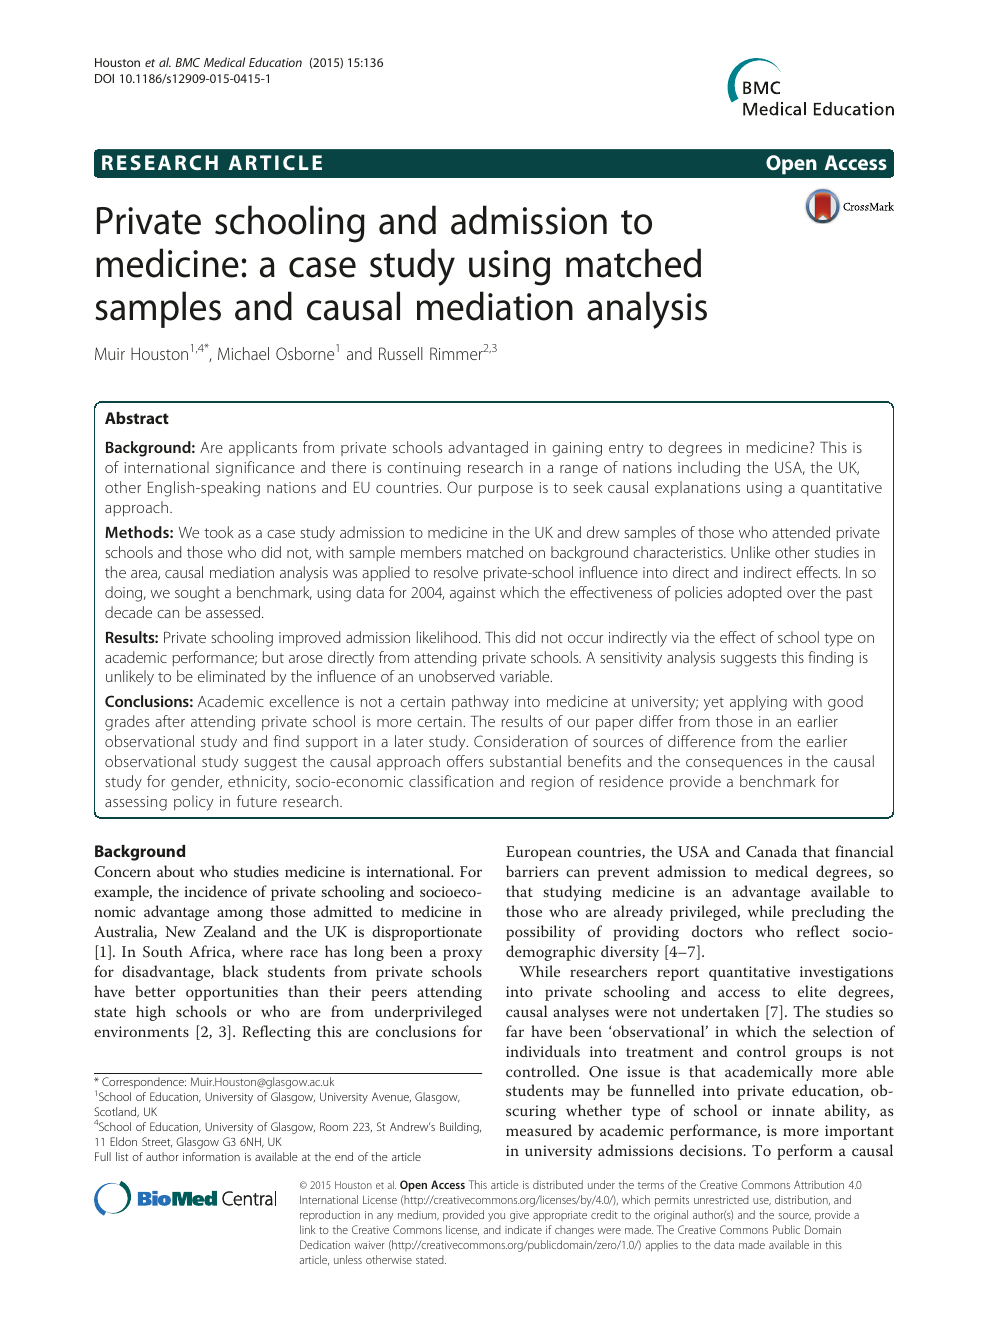 Private schooling and admission to medicine: a case study using